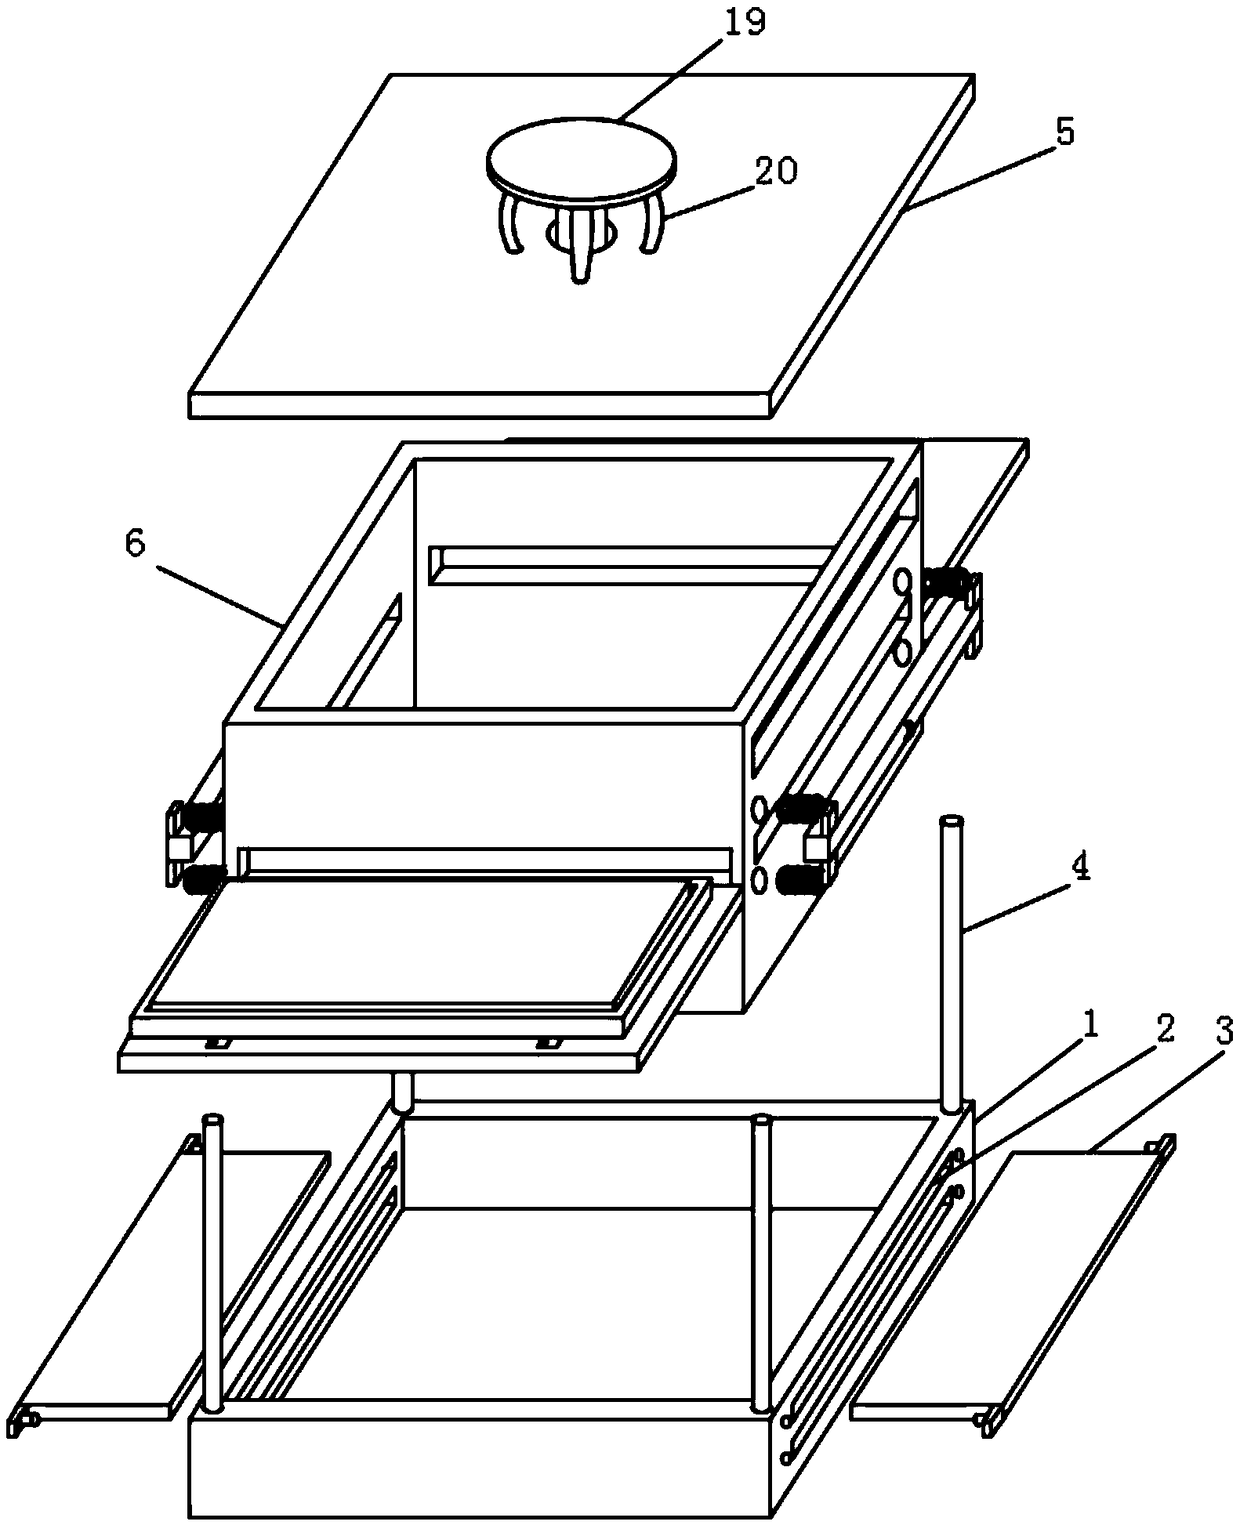 Quick adhesion device for square composite plates